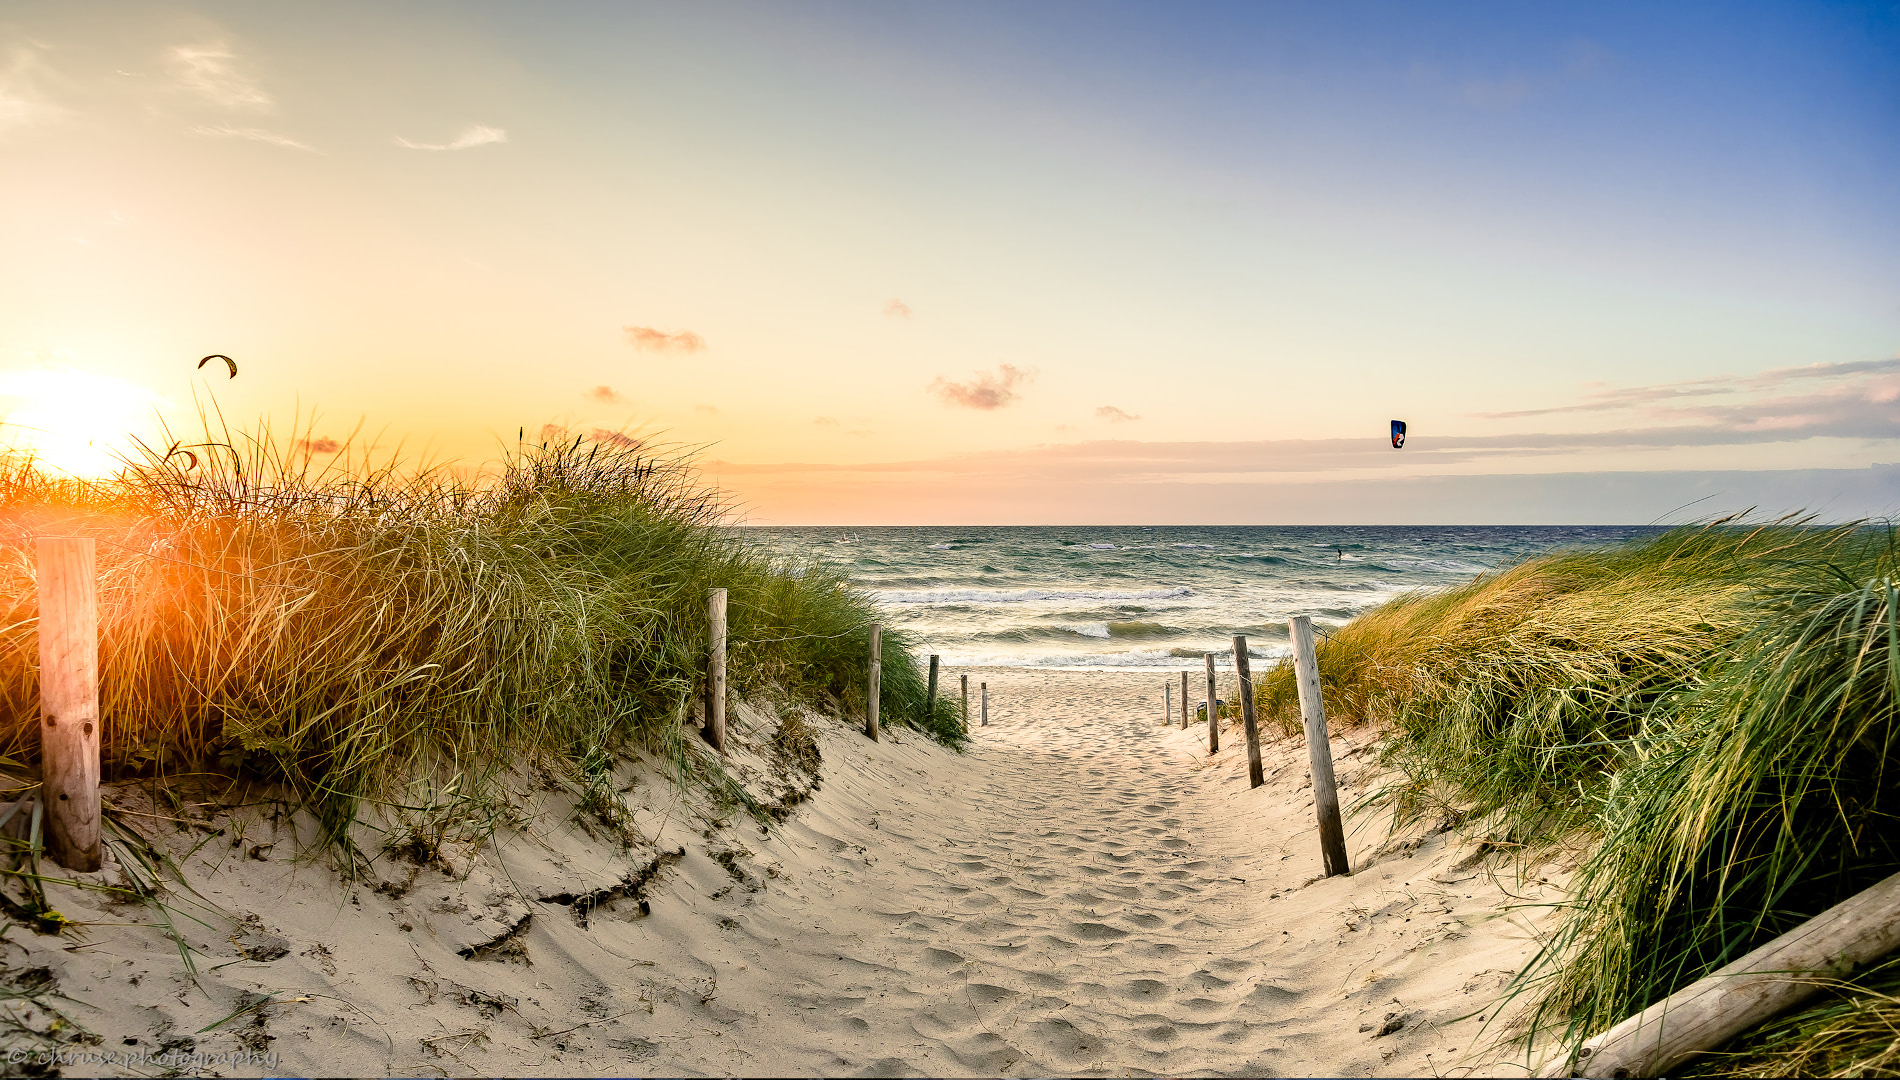 Markenentwicklung Corporate Design Zingst Strand Meer Going Places